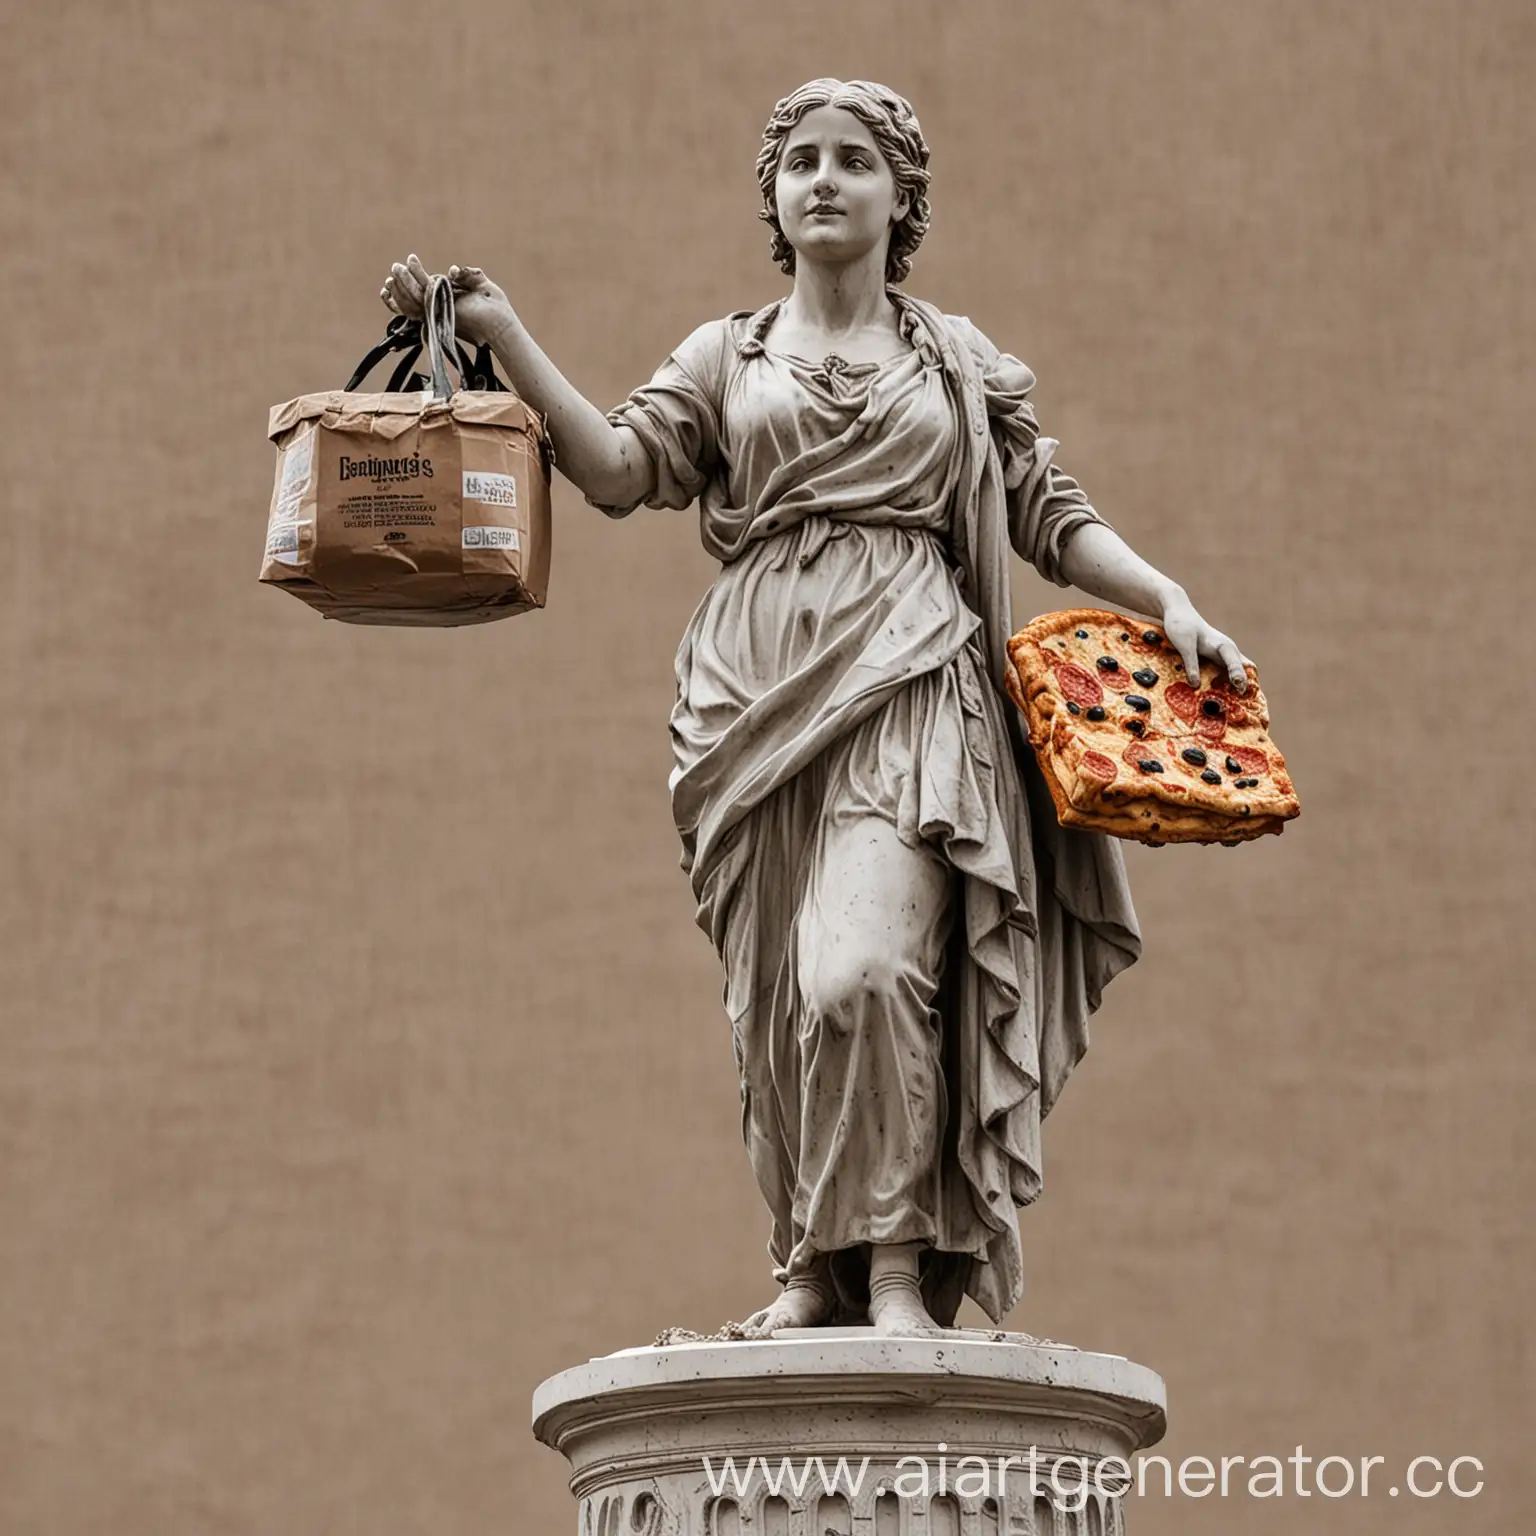 A statue of a woman on a high pedestal with a large bag on her shoulder and a box of pizza in her hands